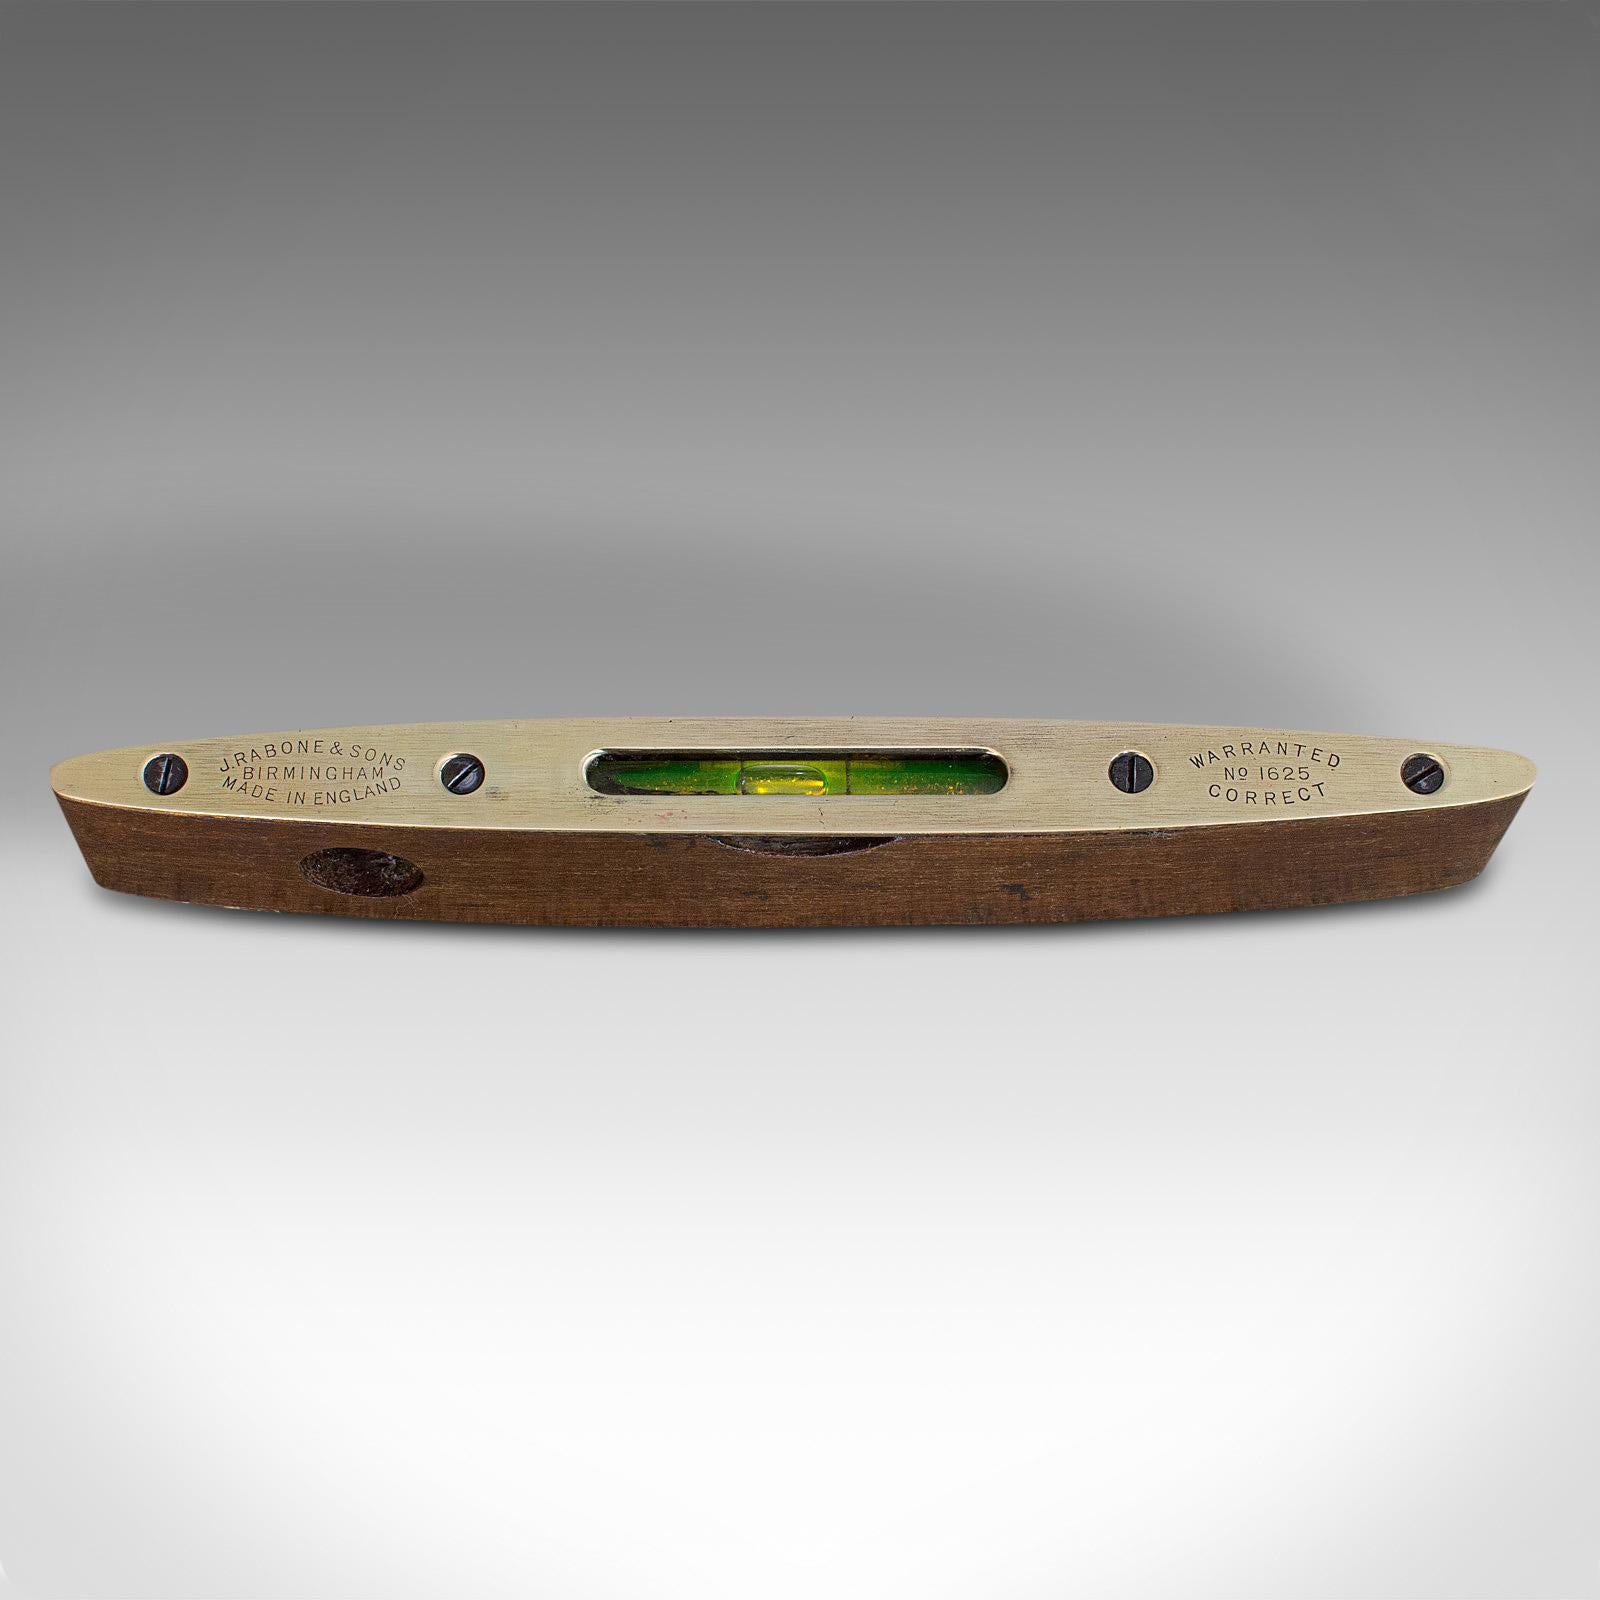 This is a vintage Rabone spirit level. An English, rosewood and brass torpedo level, dating to the mid 20th century, circa 1950.

An attractive mid-century instrument
Displays a desirable aged patina
Rosewood shows Fine grain interest and deep,